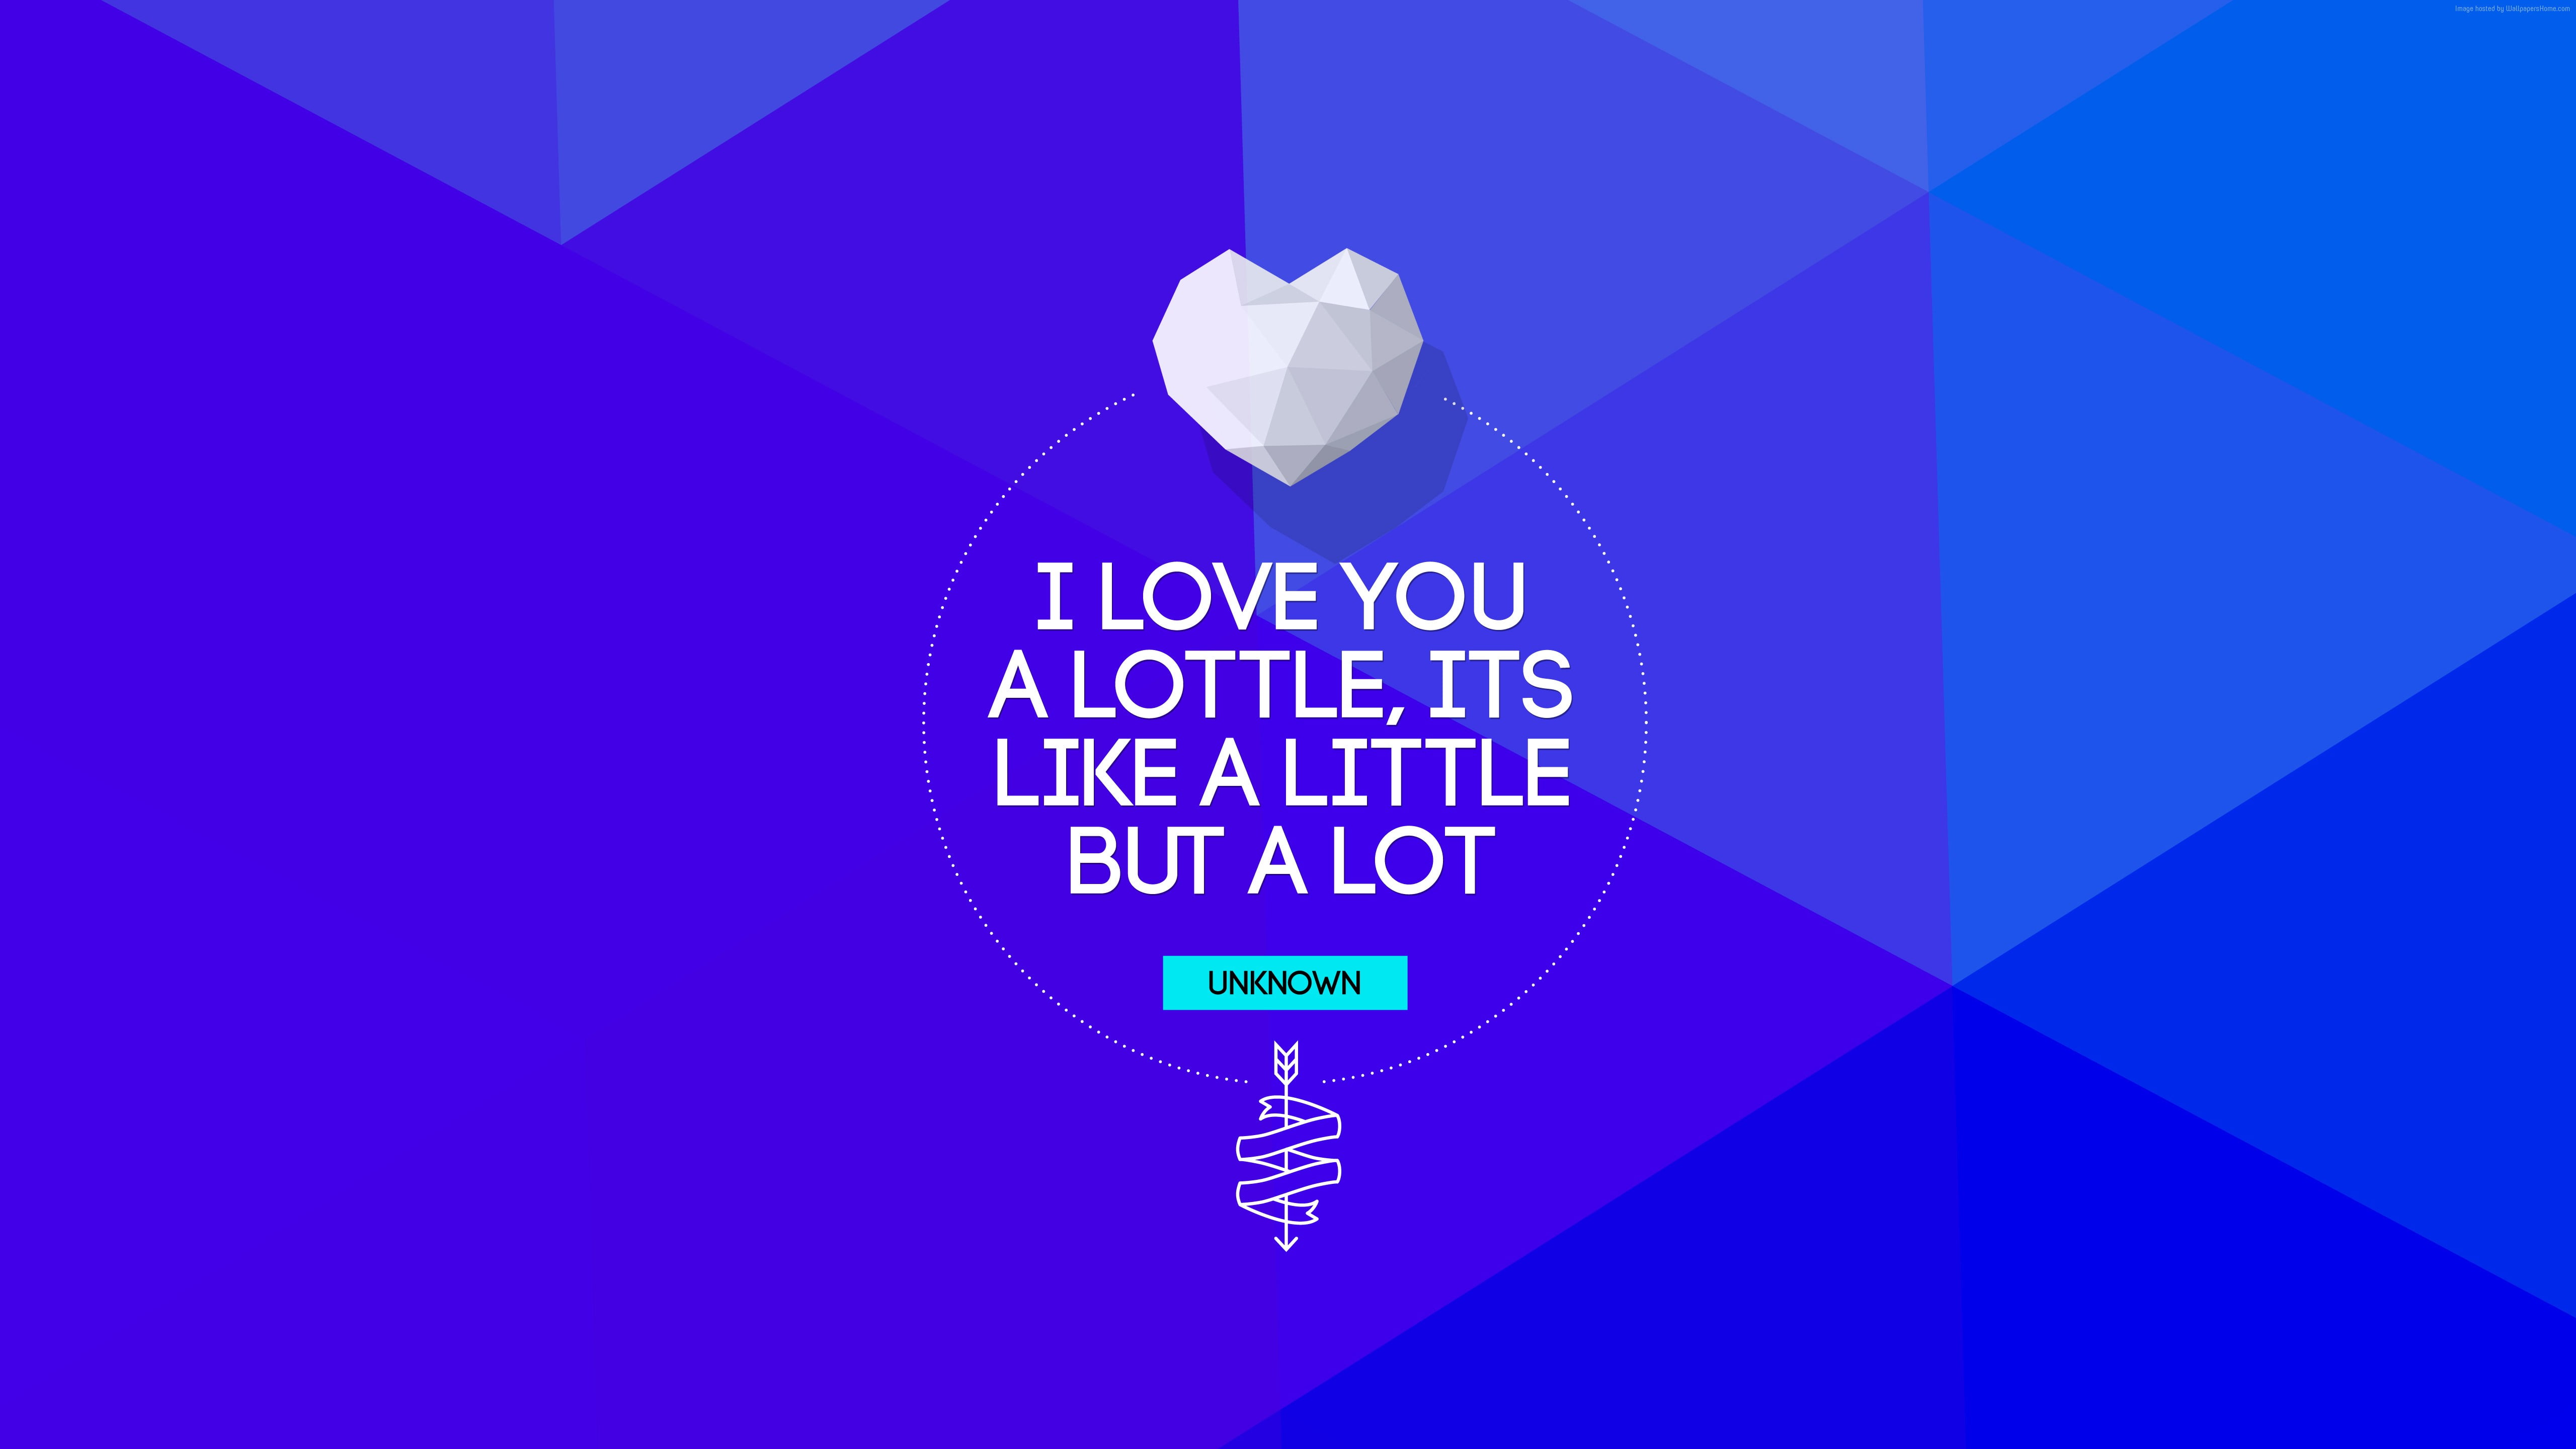 I Love You A Lottle, Its Like A Little But A Lot text